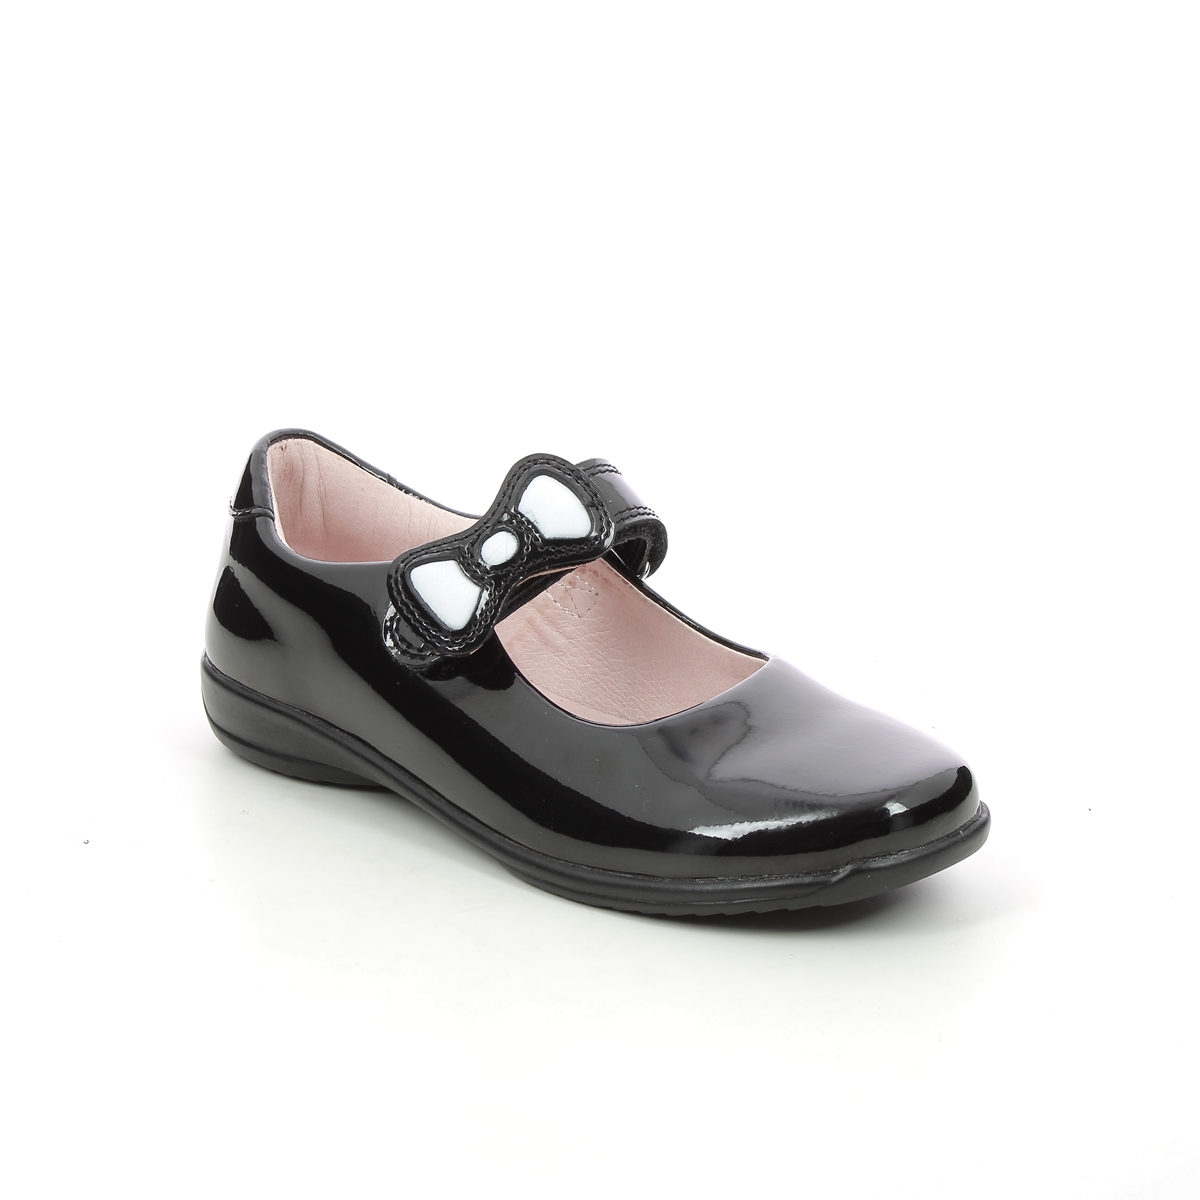 Lelli Kelly Colourissima Bow F Fit Black patent Kids Girls shoes LK8802-DB01 in a Plain  in Size 30